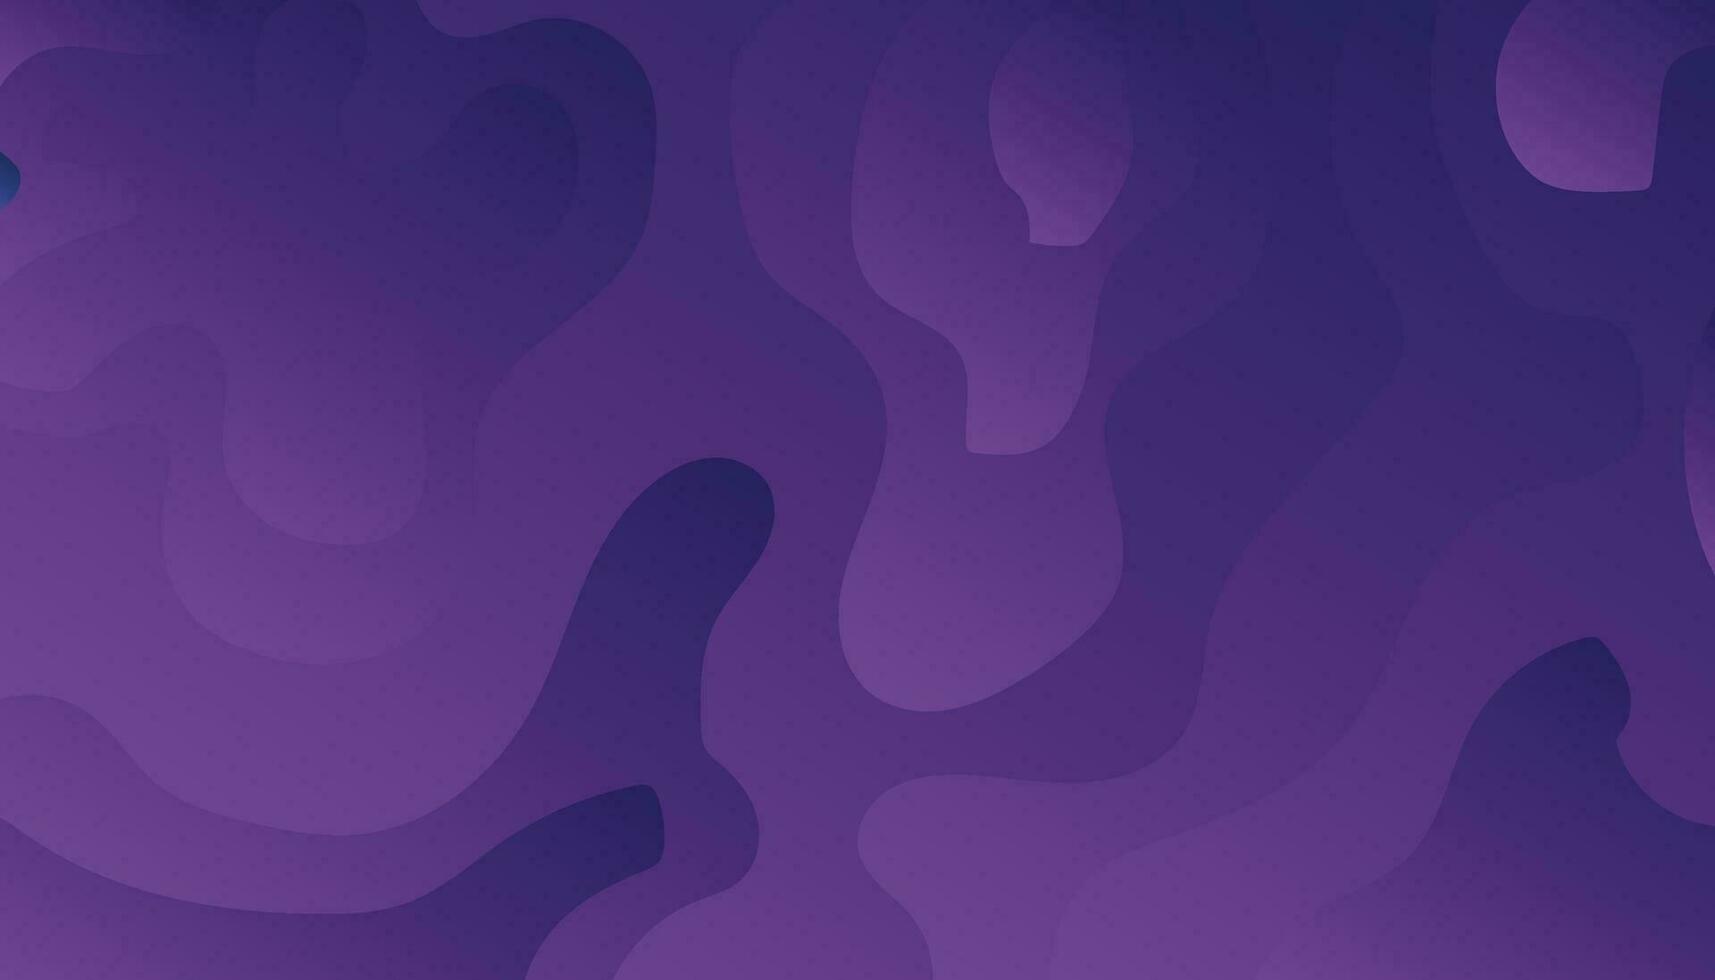 Violet Liquid color background design. Purple Fluid gradient shapes composition. Futuristic design posters. Can be use for lading page, poster or banner Eps10 vector. vector